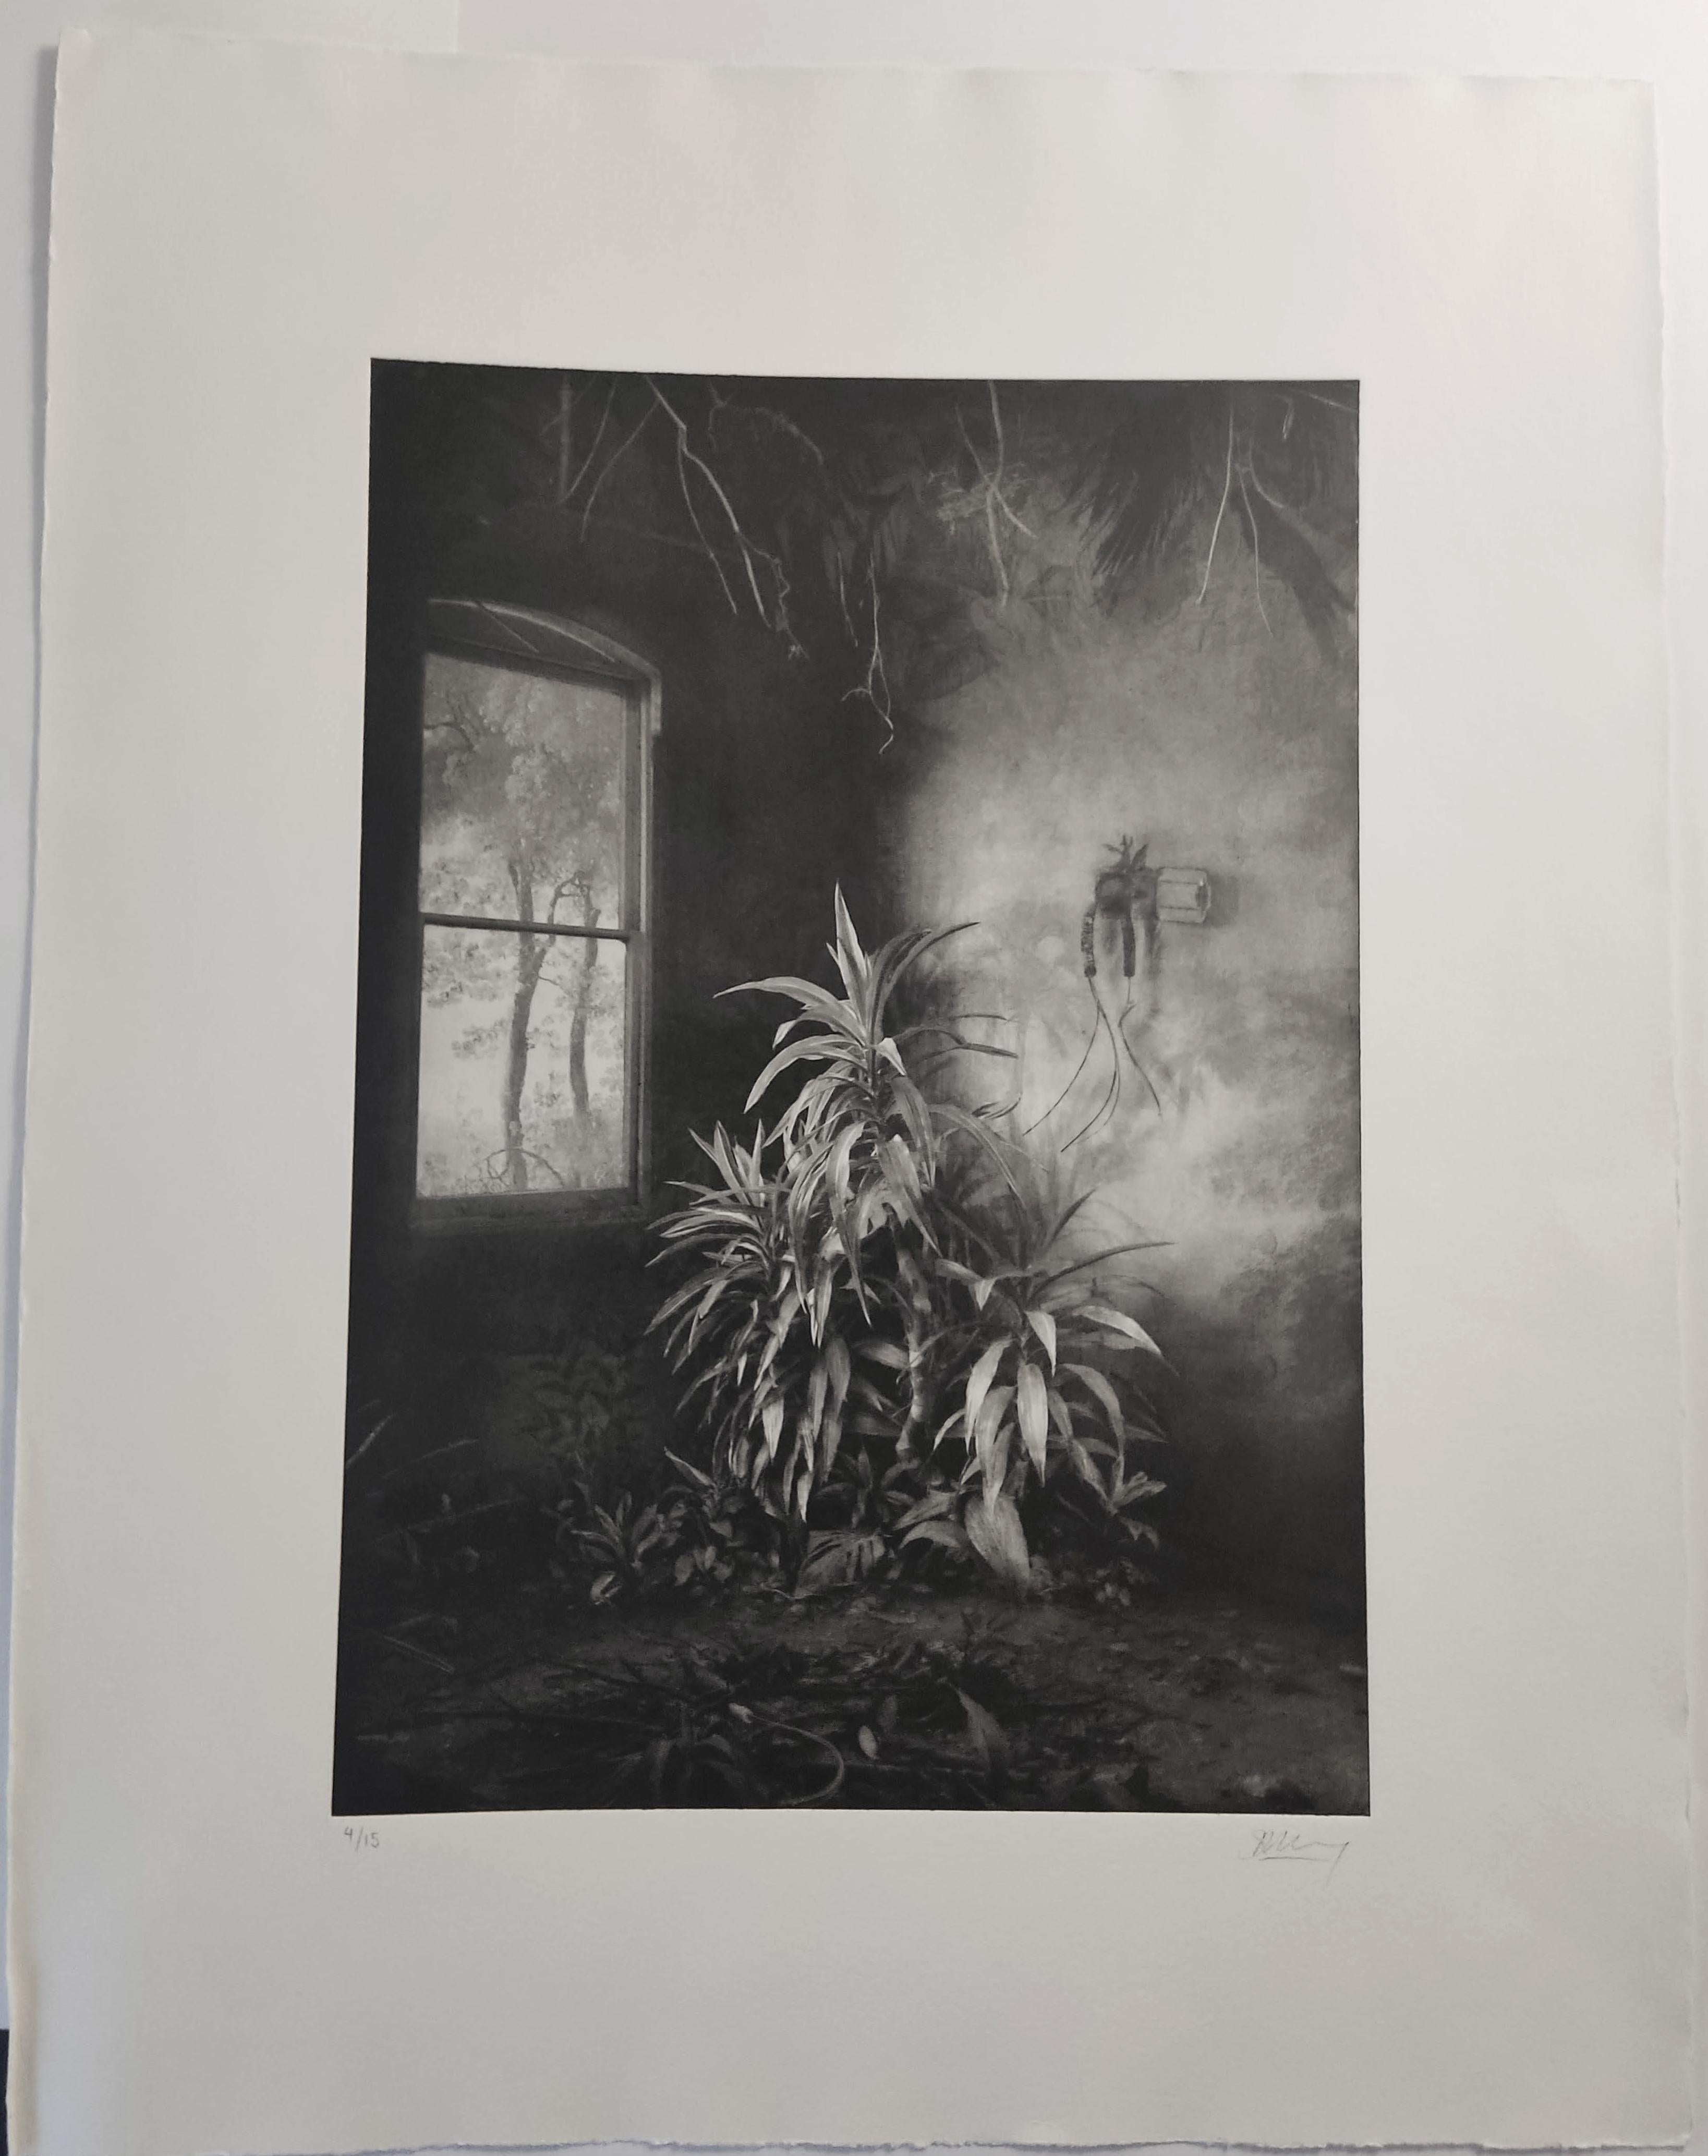 Work :  Original Gravure, Handmade Artwork, Limited Edition of 15. The work is not framed.
Medium : Photopolymer Gravure on Fine Art paper 300Gsm
Artist : Suzanne Moxhay
Subject / Title : Vegetation Under Window
Signature : The work is signed and